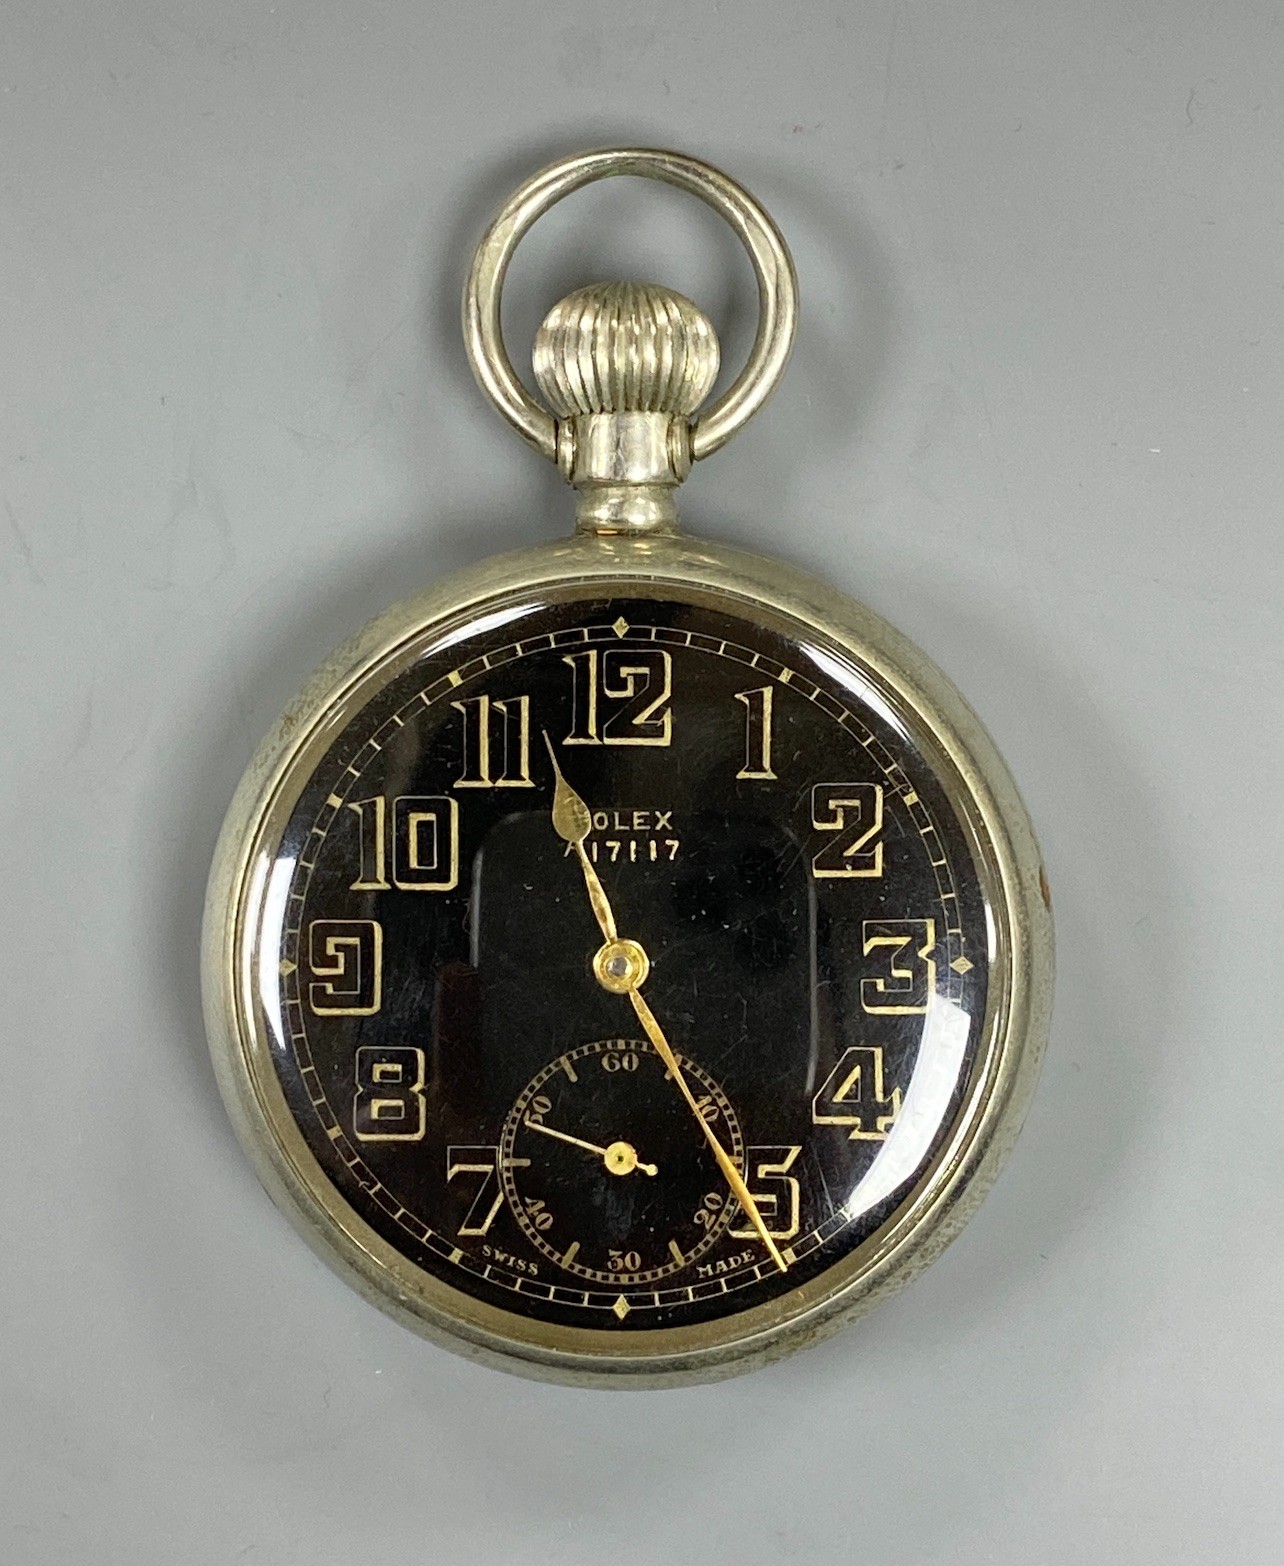 A mid 20th century nickel cased Rolex military issue open faced pocket watch, with black dial, case back with engraved broad arrow and numbered A.17117 G.S.MK.11, case diameter 50mm.